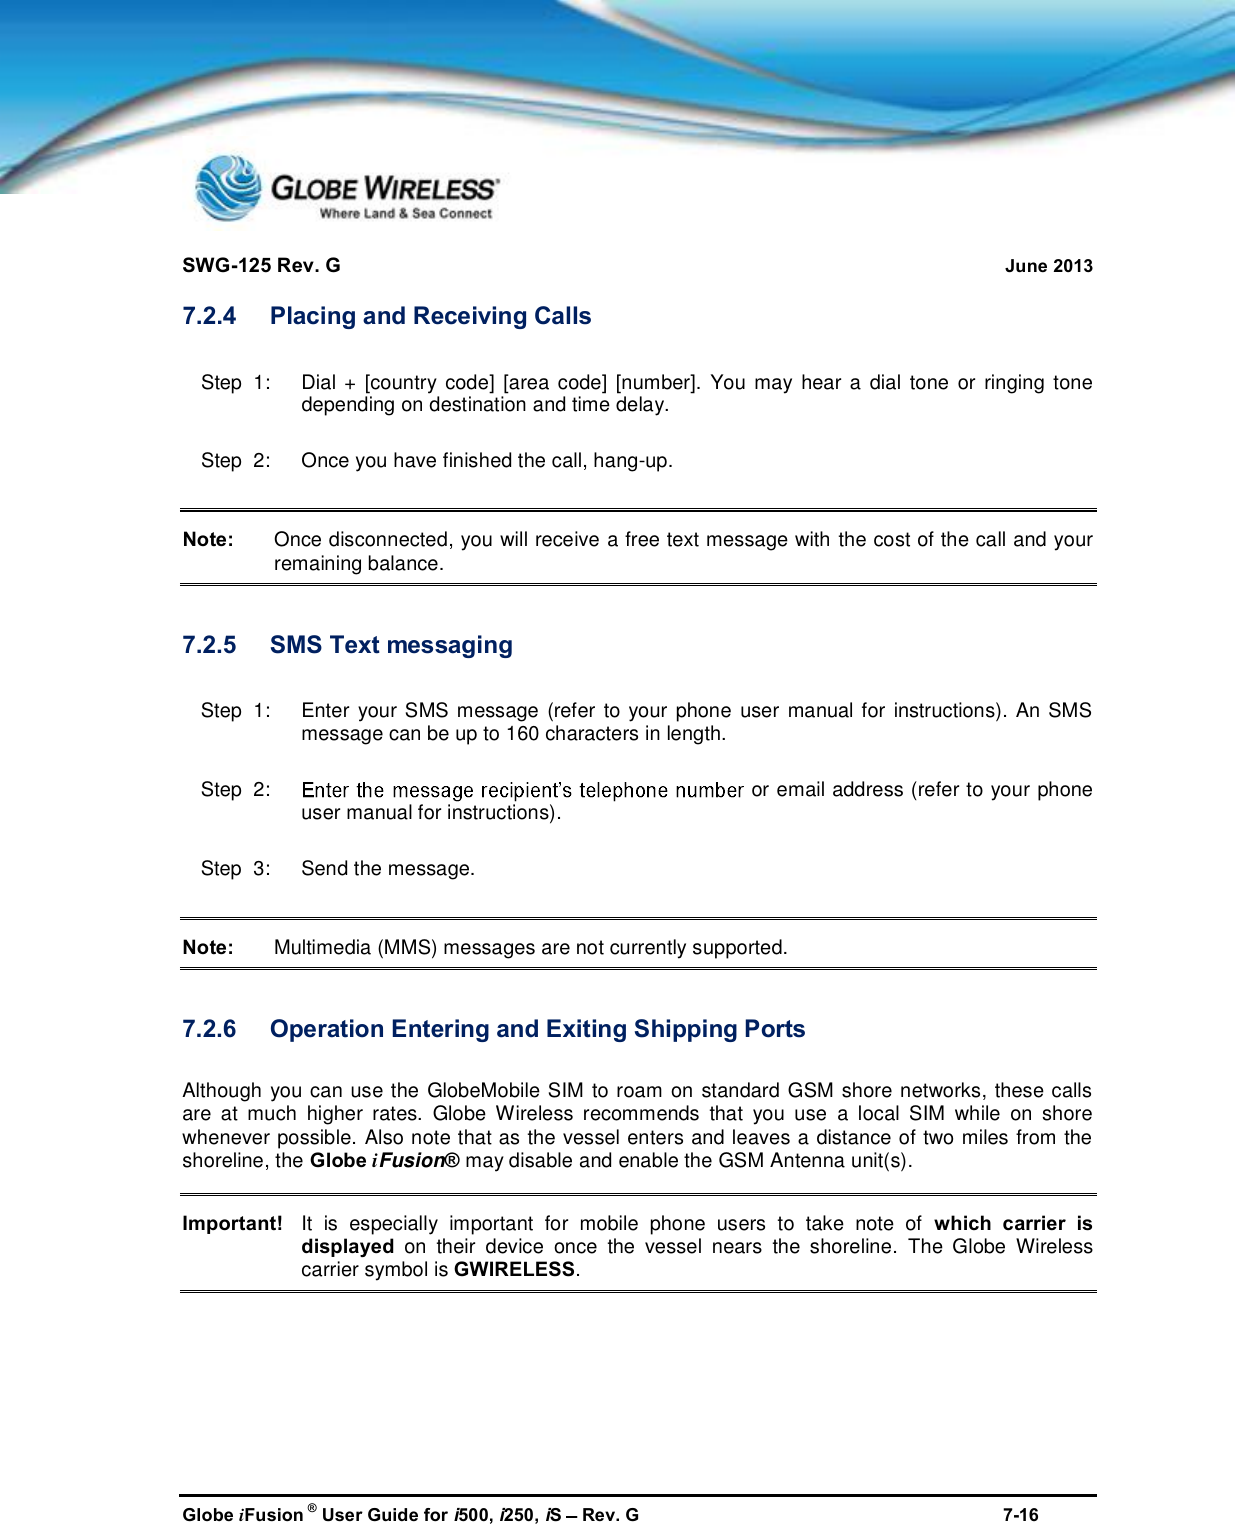 SWG-125 Rev. G June 2013Globe iFusion ®User Guide for i500, i250, iSRev. G 7-167.2.4 Placing and Receiving CallsStep  1:   Dial + [country code] [area code] [number]. You may hear a dial tone or ringing tonedepending on destination and time delay.Step  2:   Once you have finished the call, hang-up.Note: Once disconnected, you will receive a free text message with the cost of the call and yourremaining balance.7.2.5 SMS Text messagingStep  1:   Enter your SMS message (refer to your phone user manual for instructions). An SMSmessage can be up to 160 characters in length.Step  2: or email address (refer to your phoneuser manual for instructions).Step  3:   Send the message.Note: Multimedia (MMS) messages are not currently supported.7.2.6 Operation Entering and Exiting Shipping PortsAlthough you can use the GlobeMobile SIM to roam on standard GSM shore networks, these callsare at much higher rates. Globe Wireless recommends that you use a local SIM while on shorewhenever possible. Also note that as the vessel enters and leaves a distance of two miles from theshoreline, the Globe iFusion®may disable and enable the GSM Antenna unit(s).Important! It is especially important for mobile phone users to take note of which carrier isdisplayed on their device once the vessel nears the shoreline. The Globe Wirelesscarrier symbol is GWIRELESS.